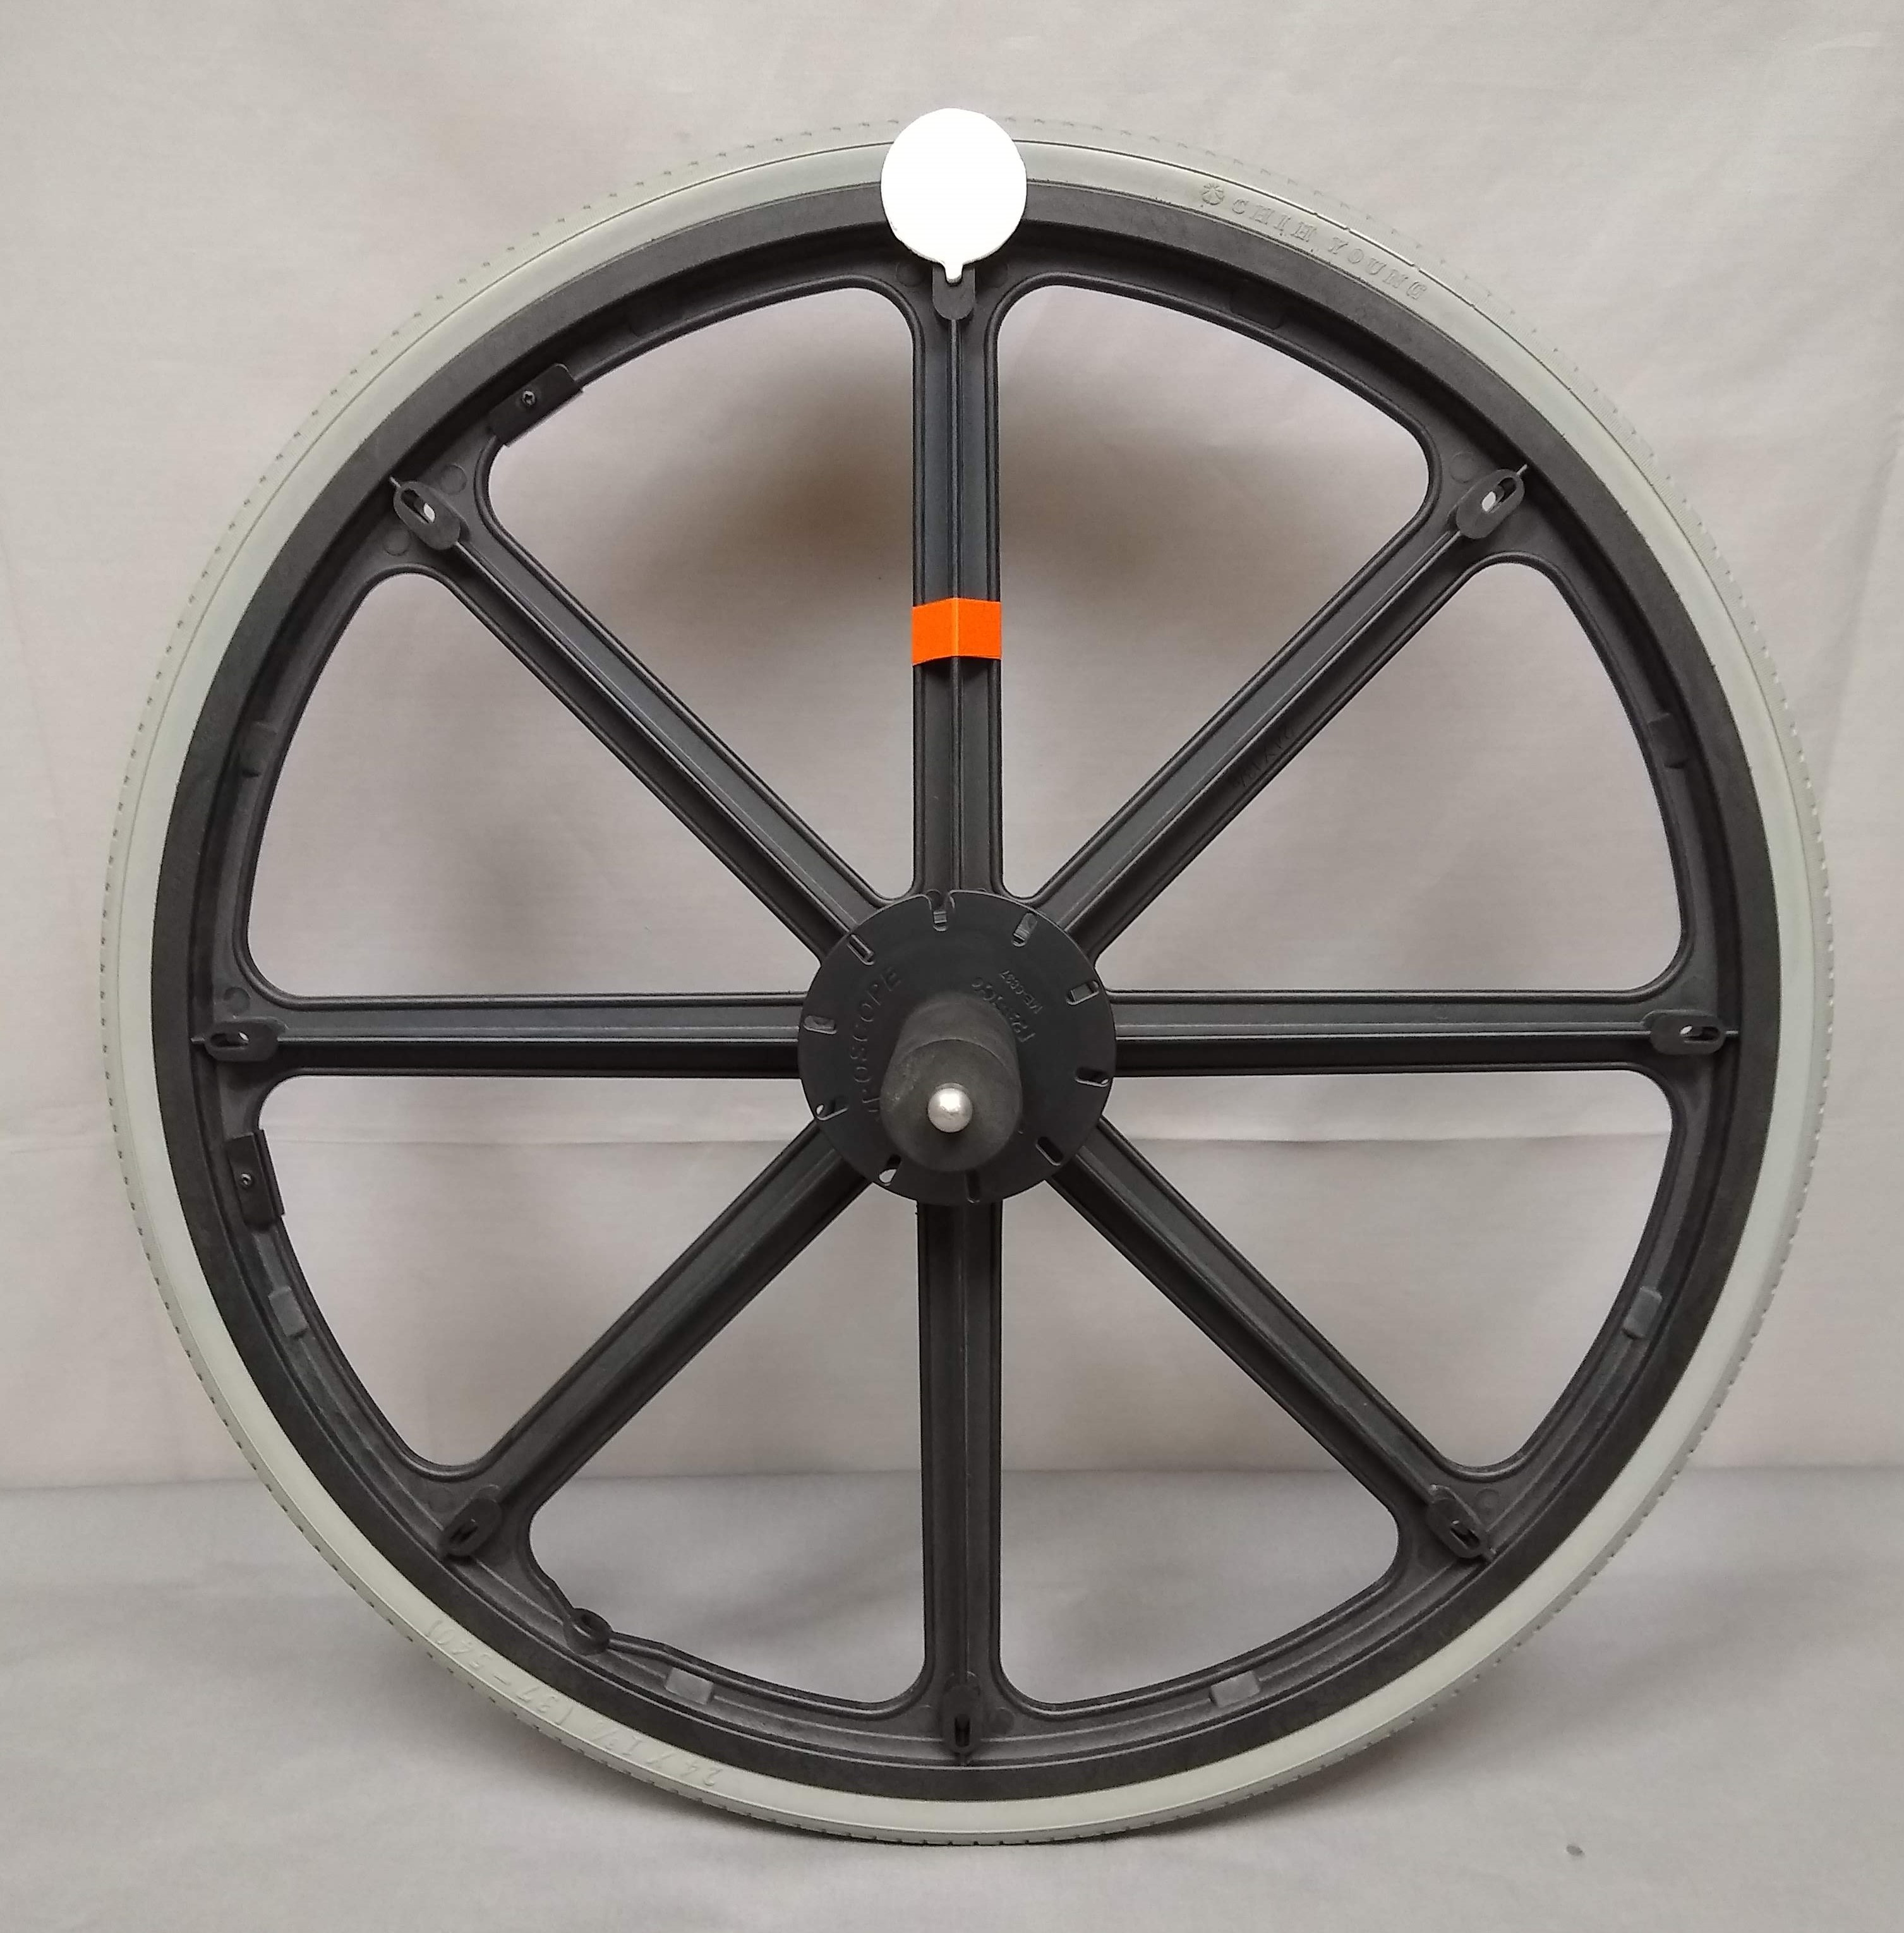 Motion in two dimensions on a handheld wheel. 